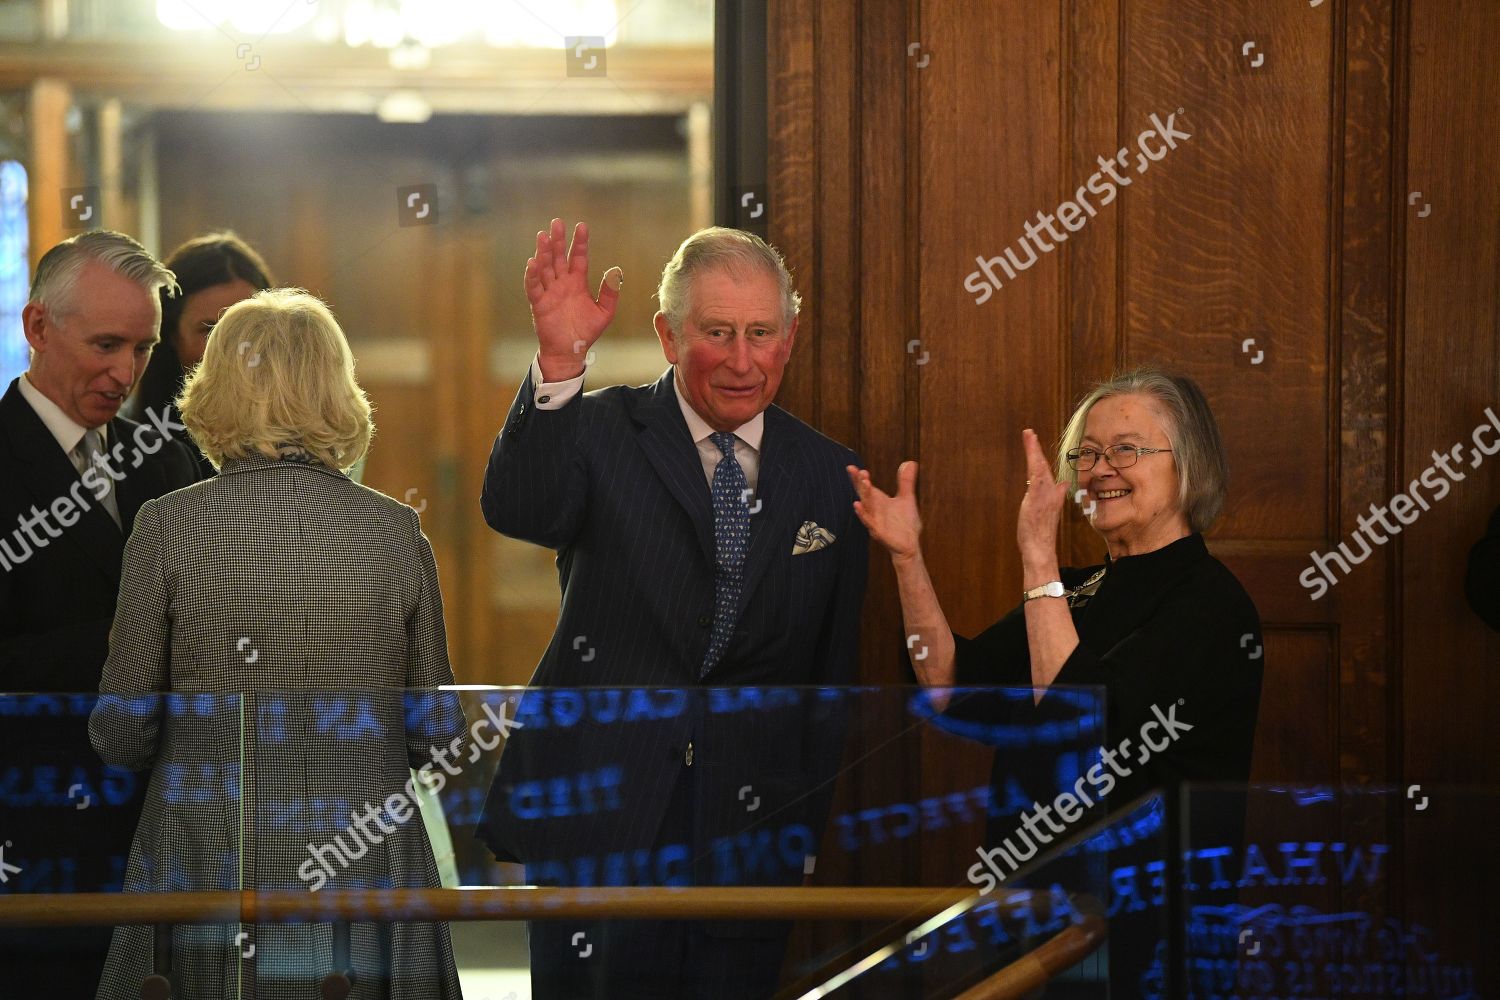 prince-charles-and-camilla-duchess-of-cornwall-visit-to-the-supreme-court-london-uk-shutterstock-editorial-10088612m.jpg